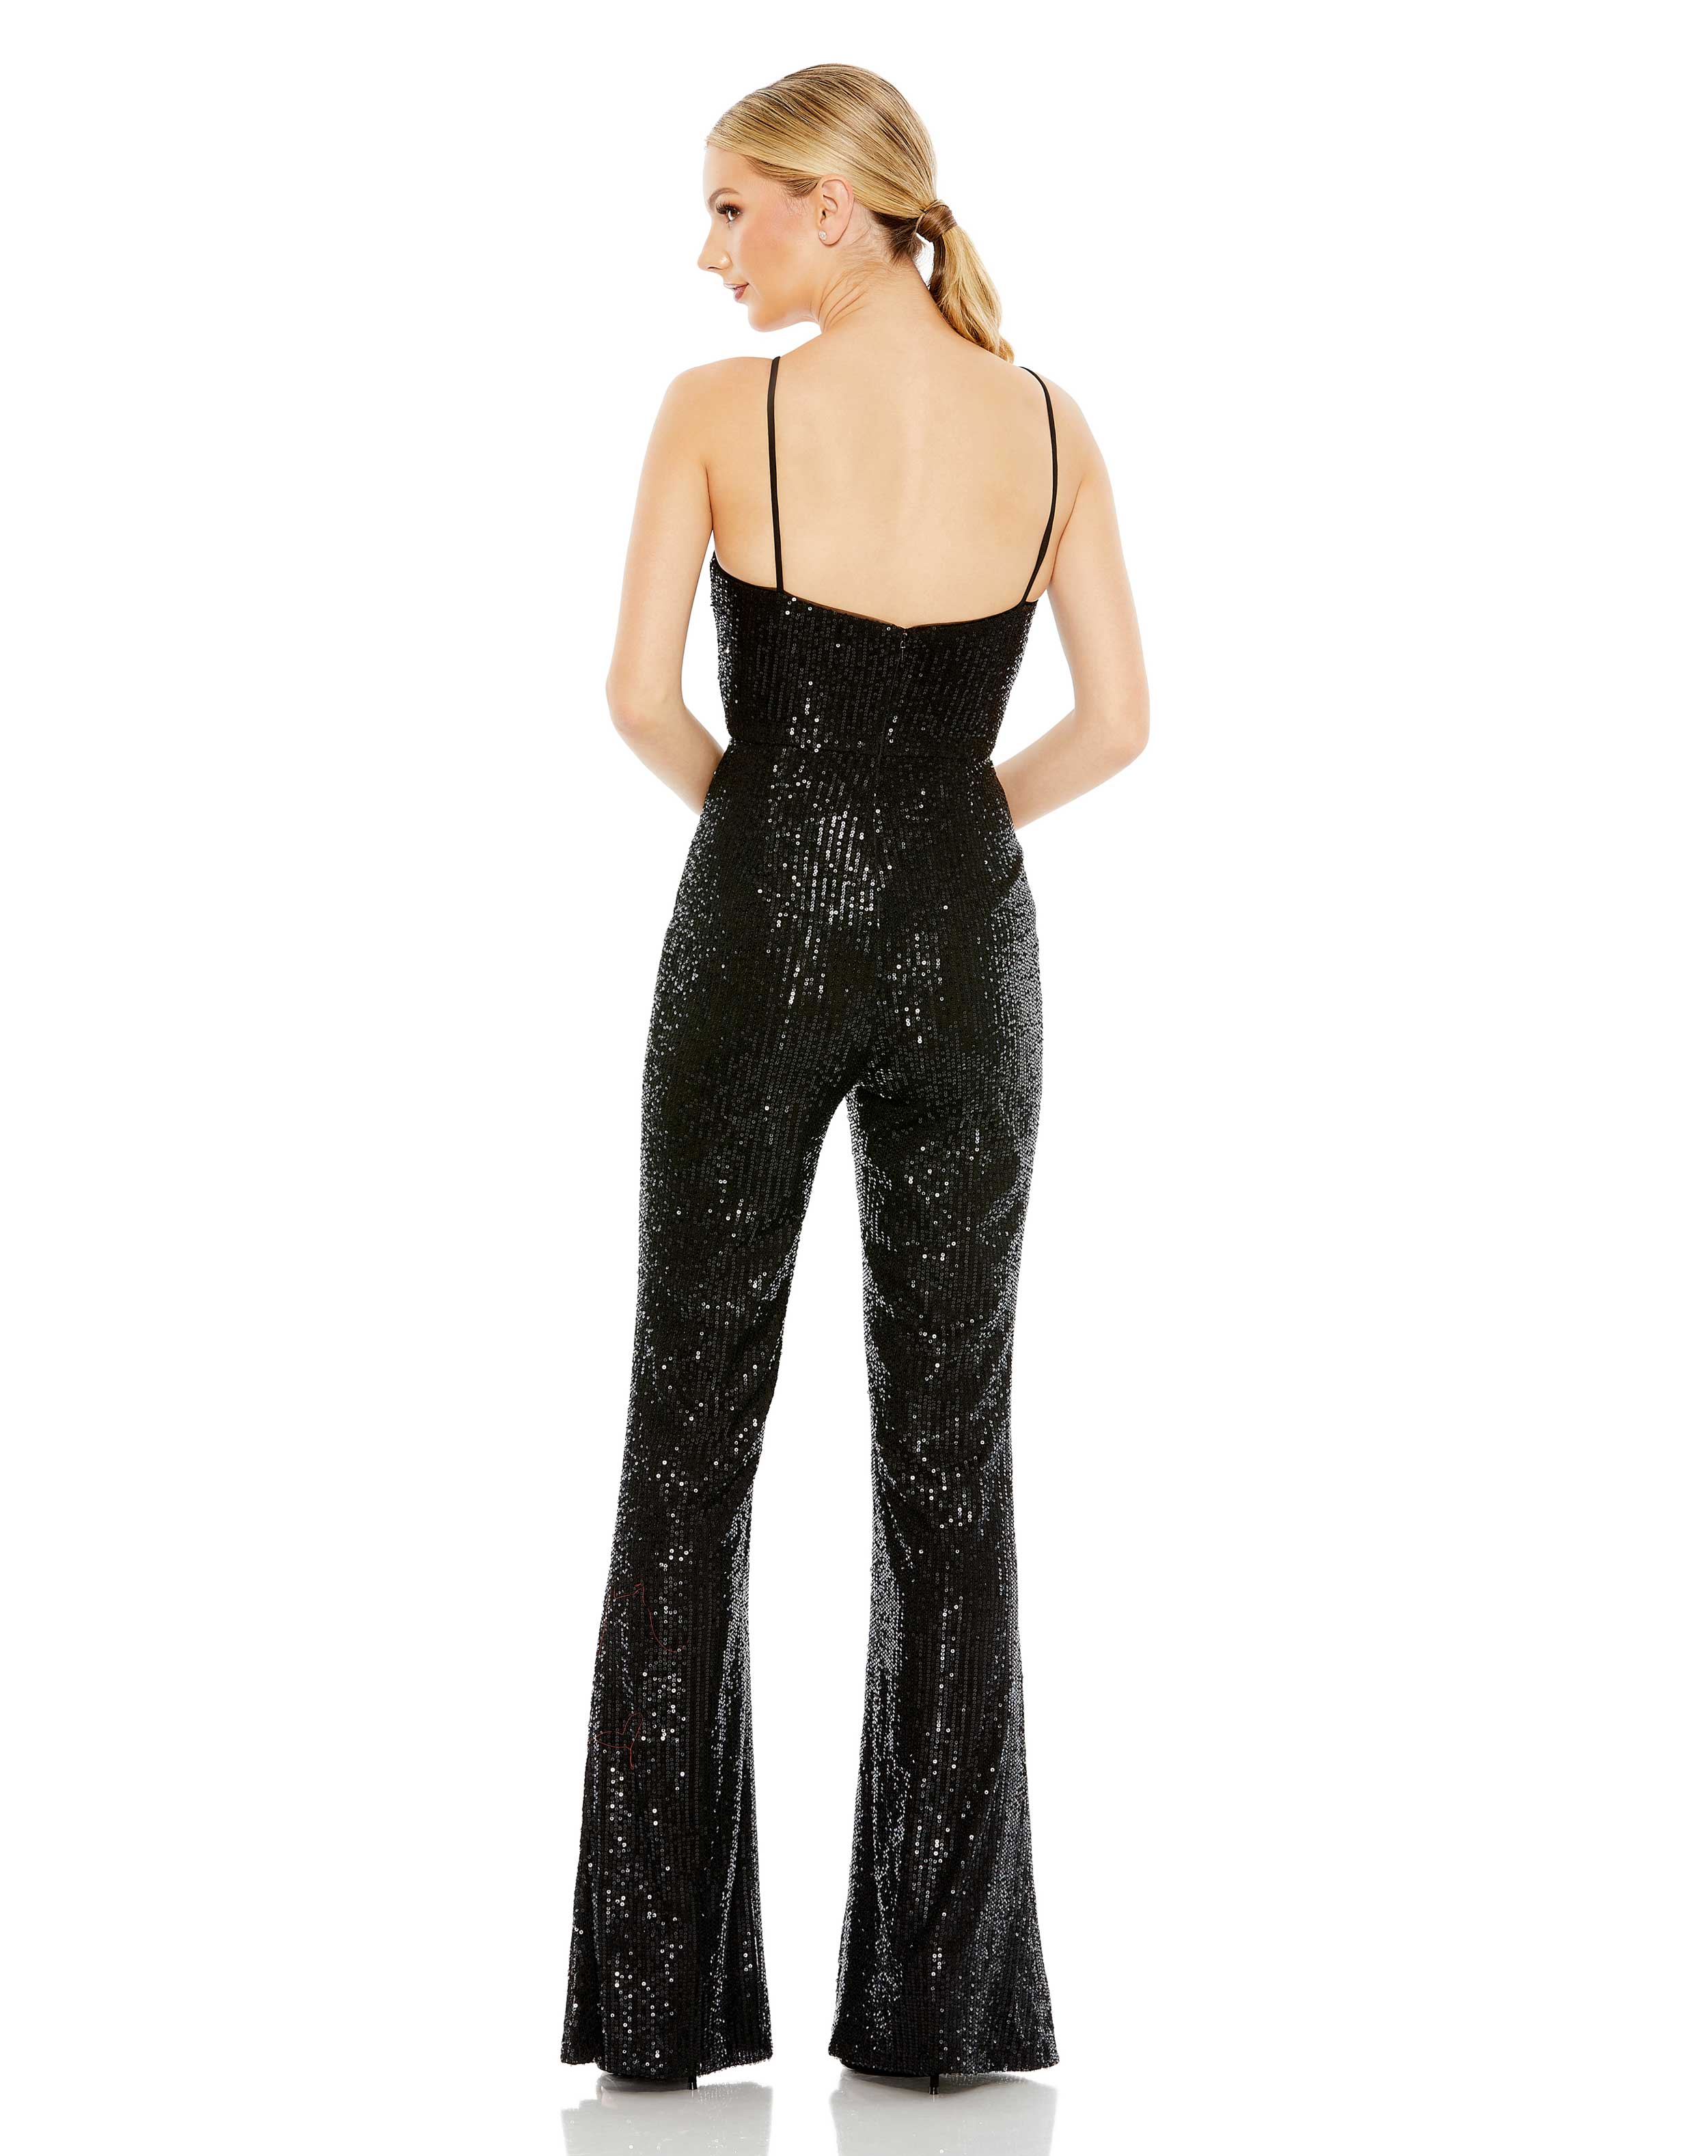 Sequined Spaghetti Strap Cut Out Jumpsuit - FINAL SALE